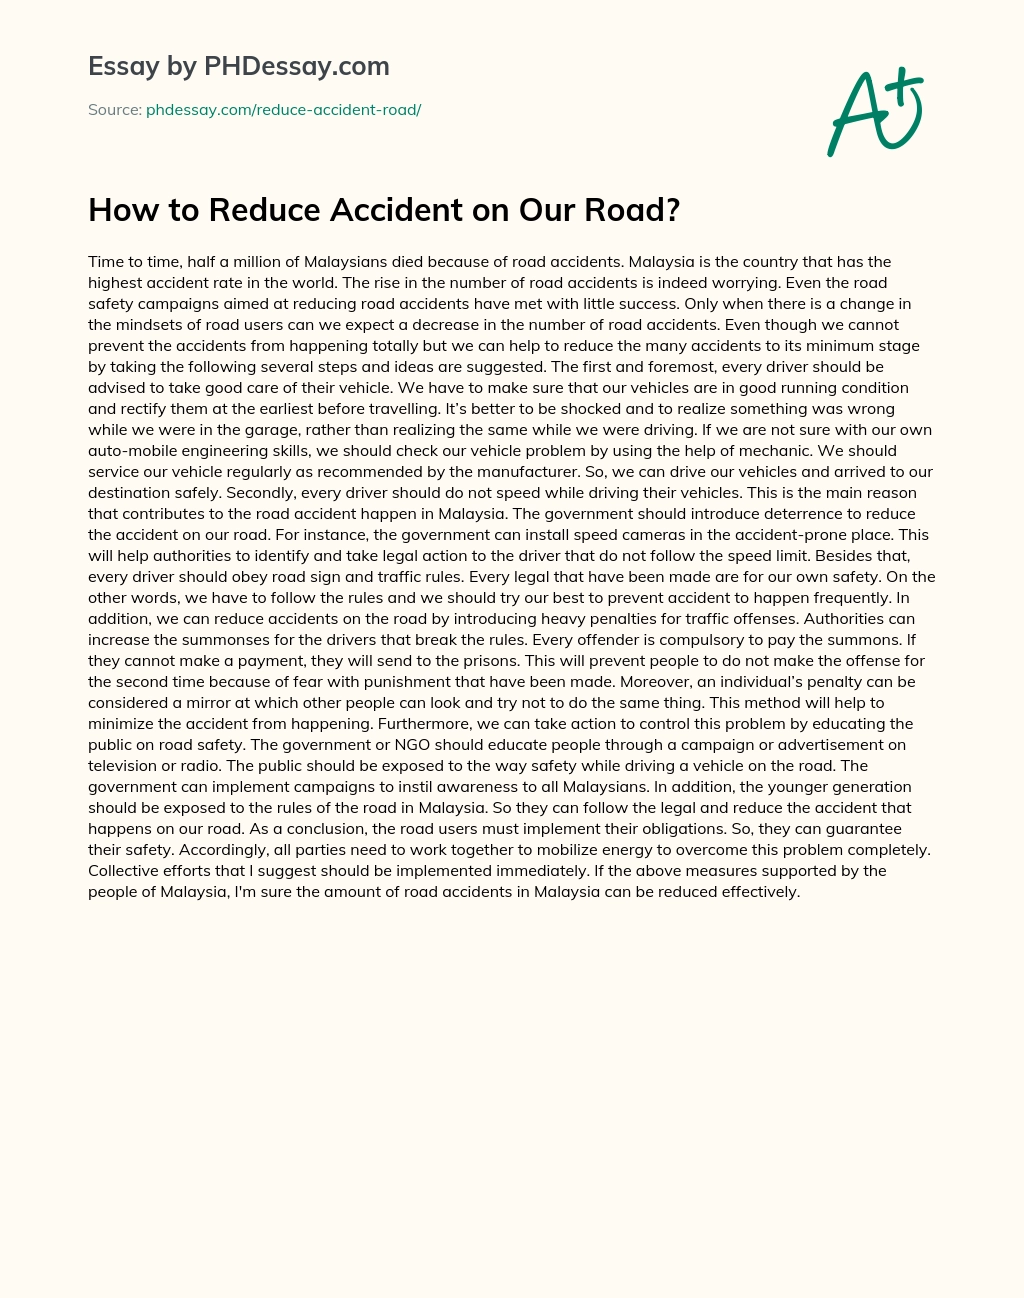 How to Reduce Accident on Our Road? essay